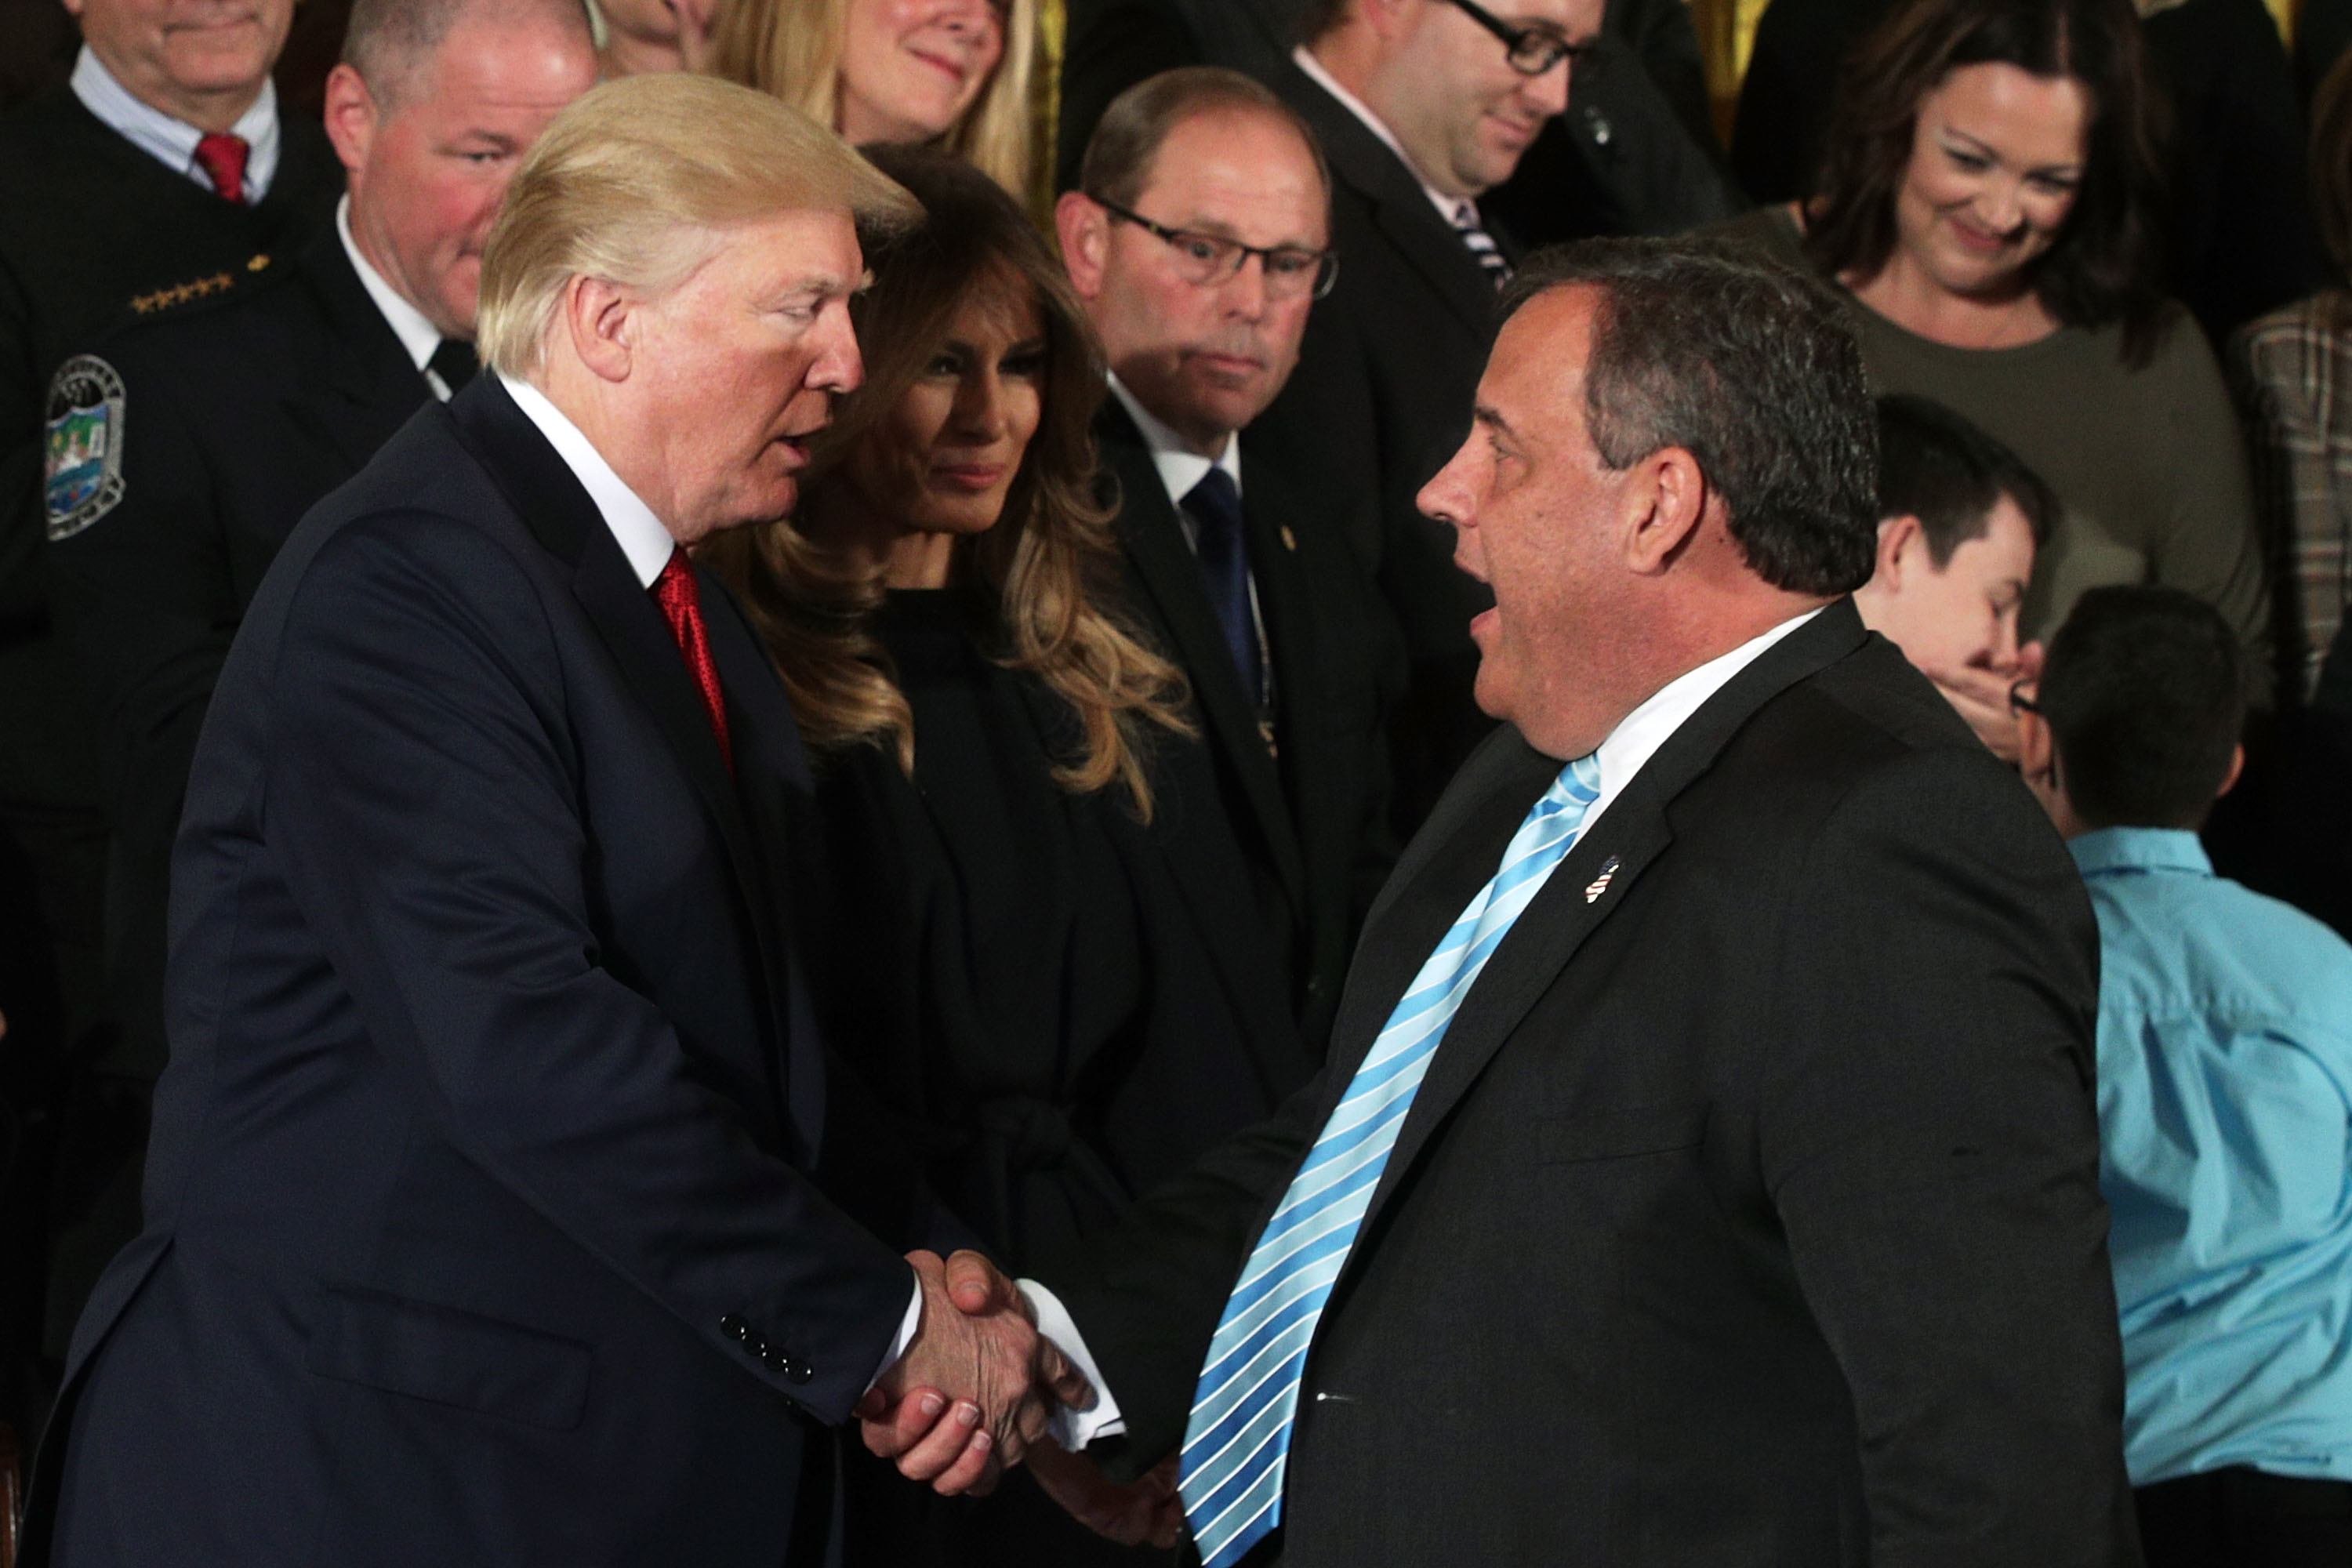 President Donald Trump shakes hands with New Jersey Governor Chris Christie as first lady Melania Trump looks on during an event highlighting the opioid crisis in the U.S. on October 26, 2017. (Photo: Alex Wong/Getty Images)